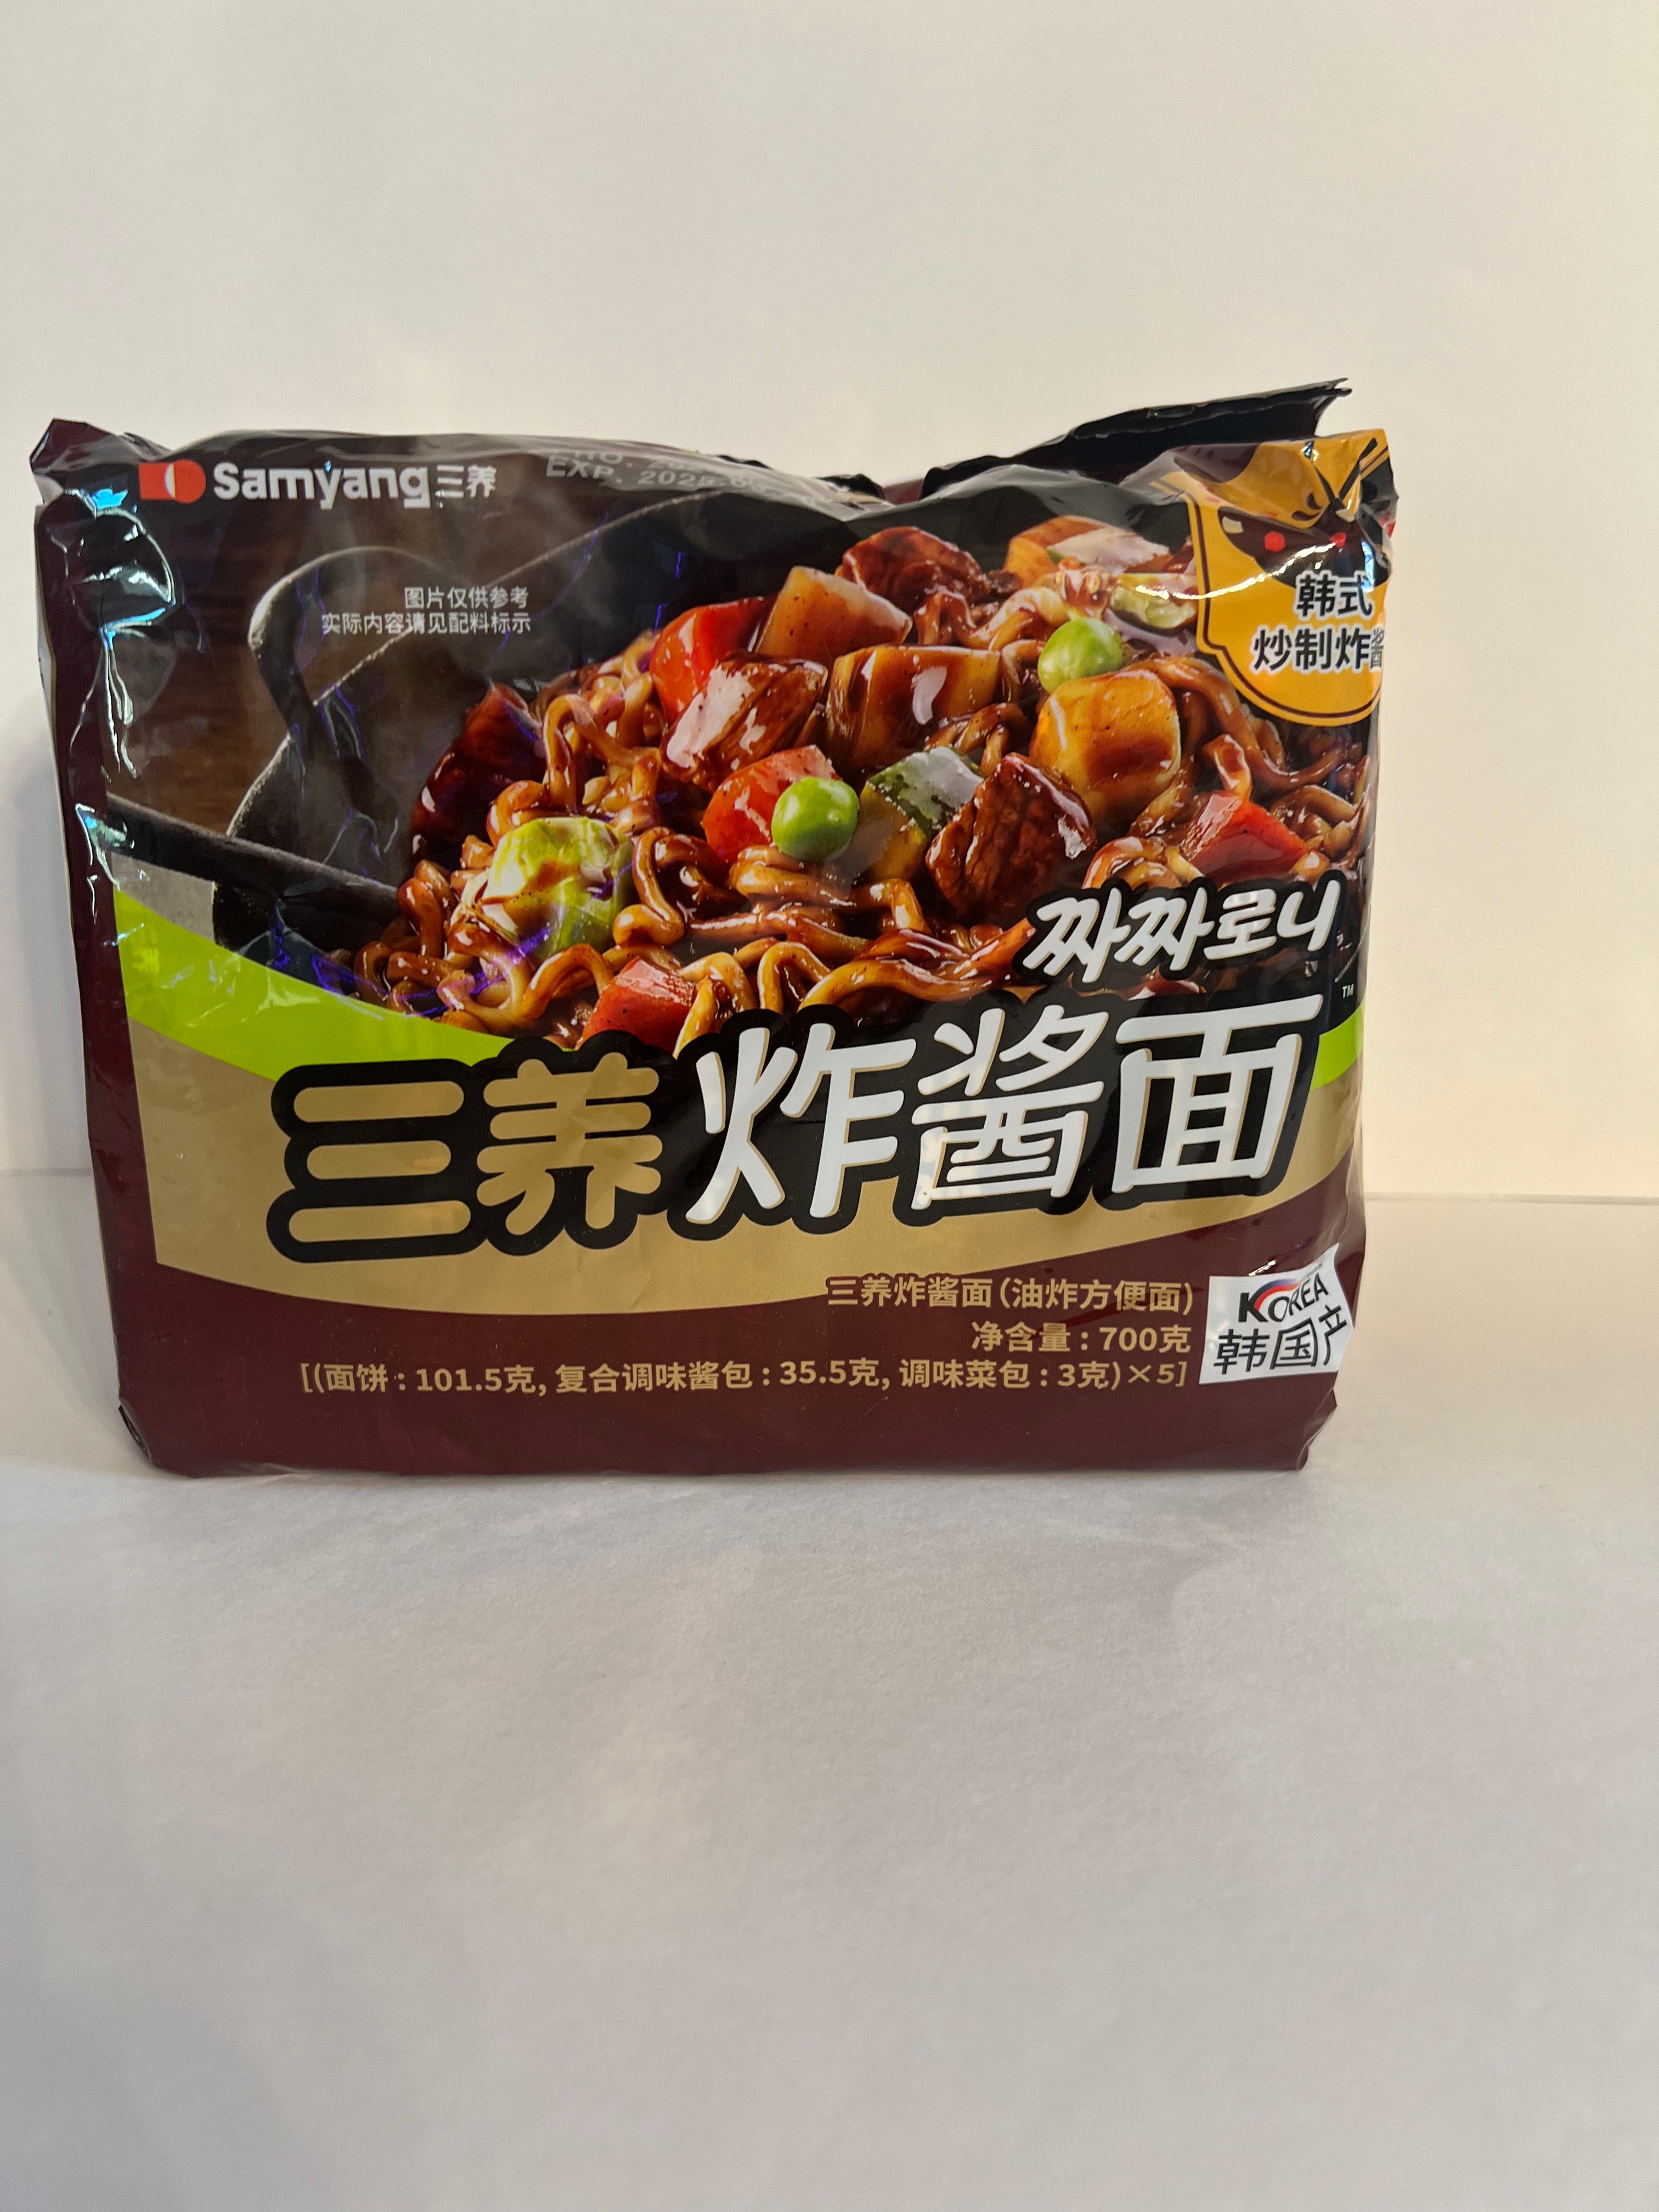 Samyang Noodles with Soybean paste